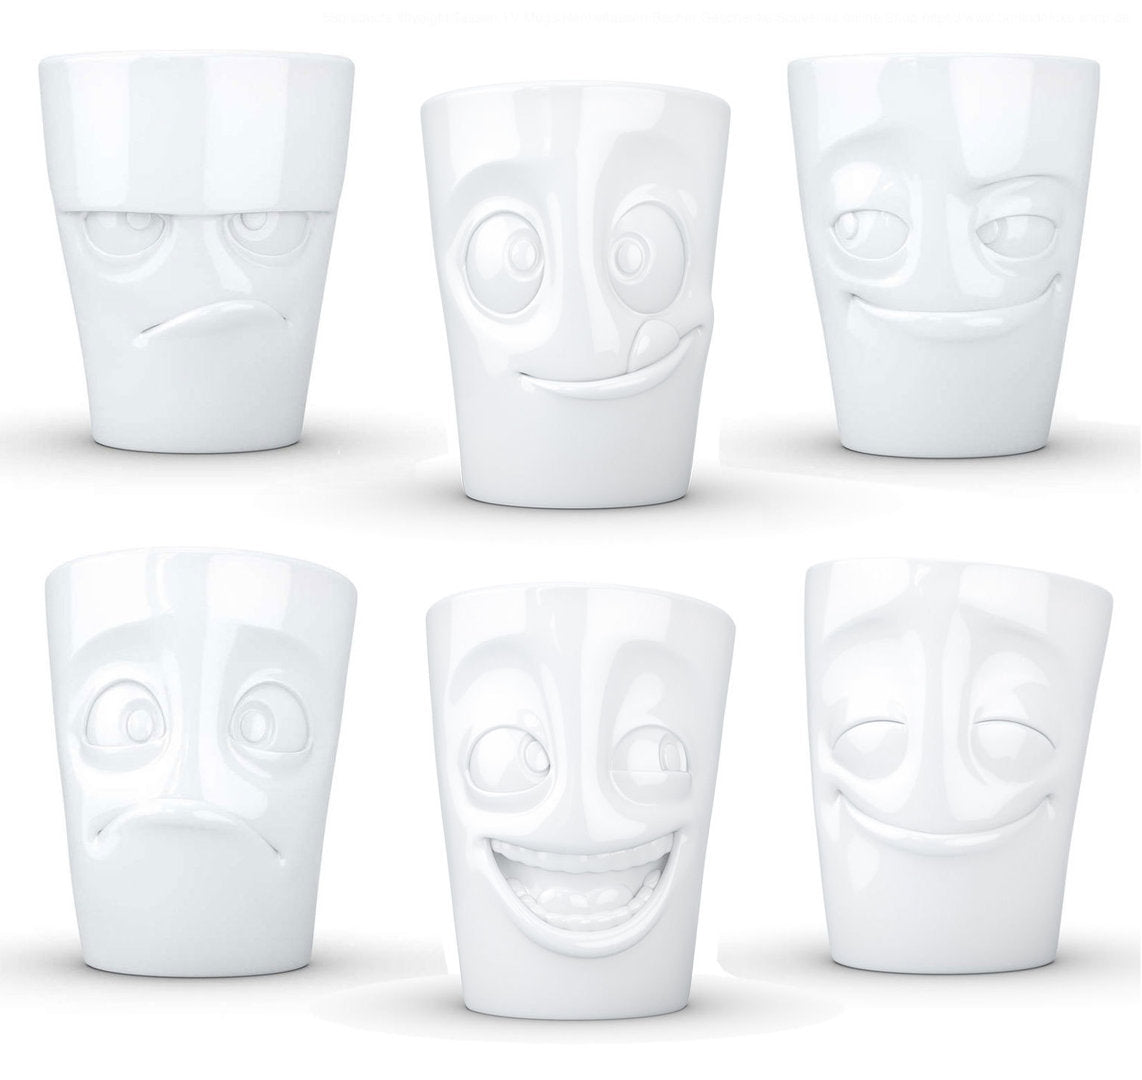 Handle mug/handle cup-white-various-motifs-from-58-products-berlindeluxe-cups-funny-faces